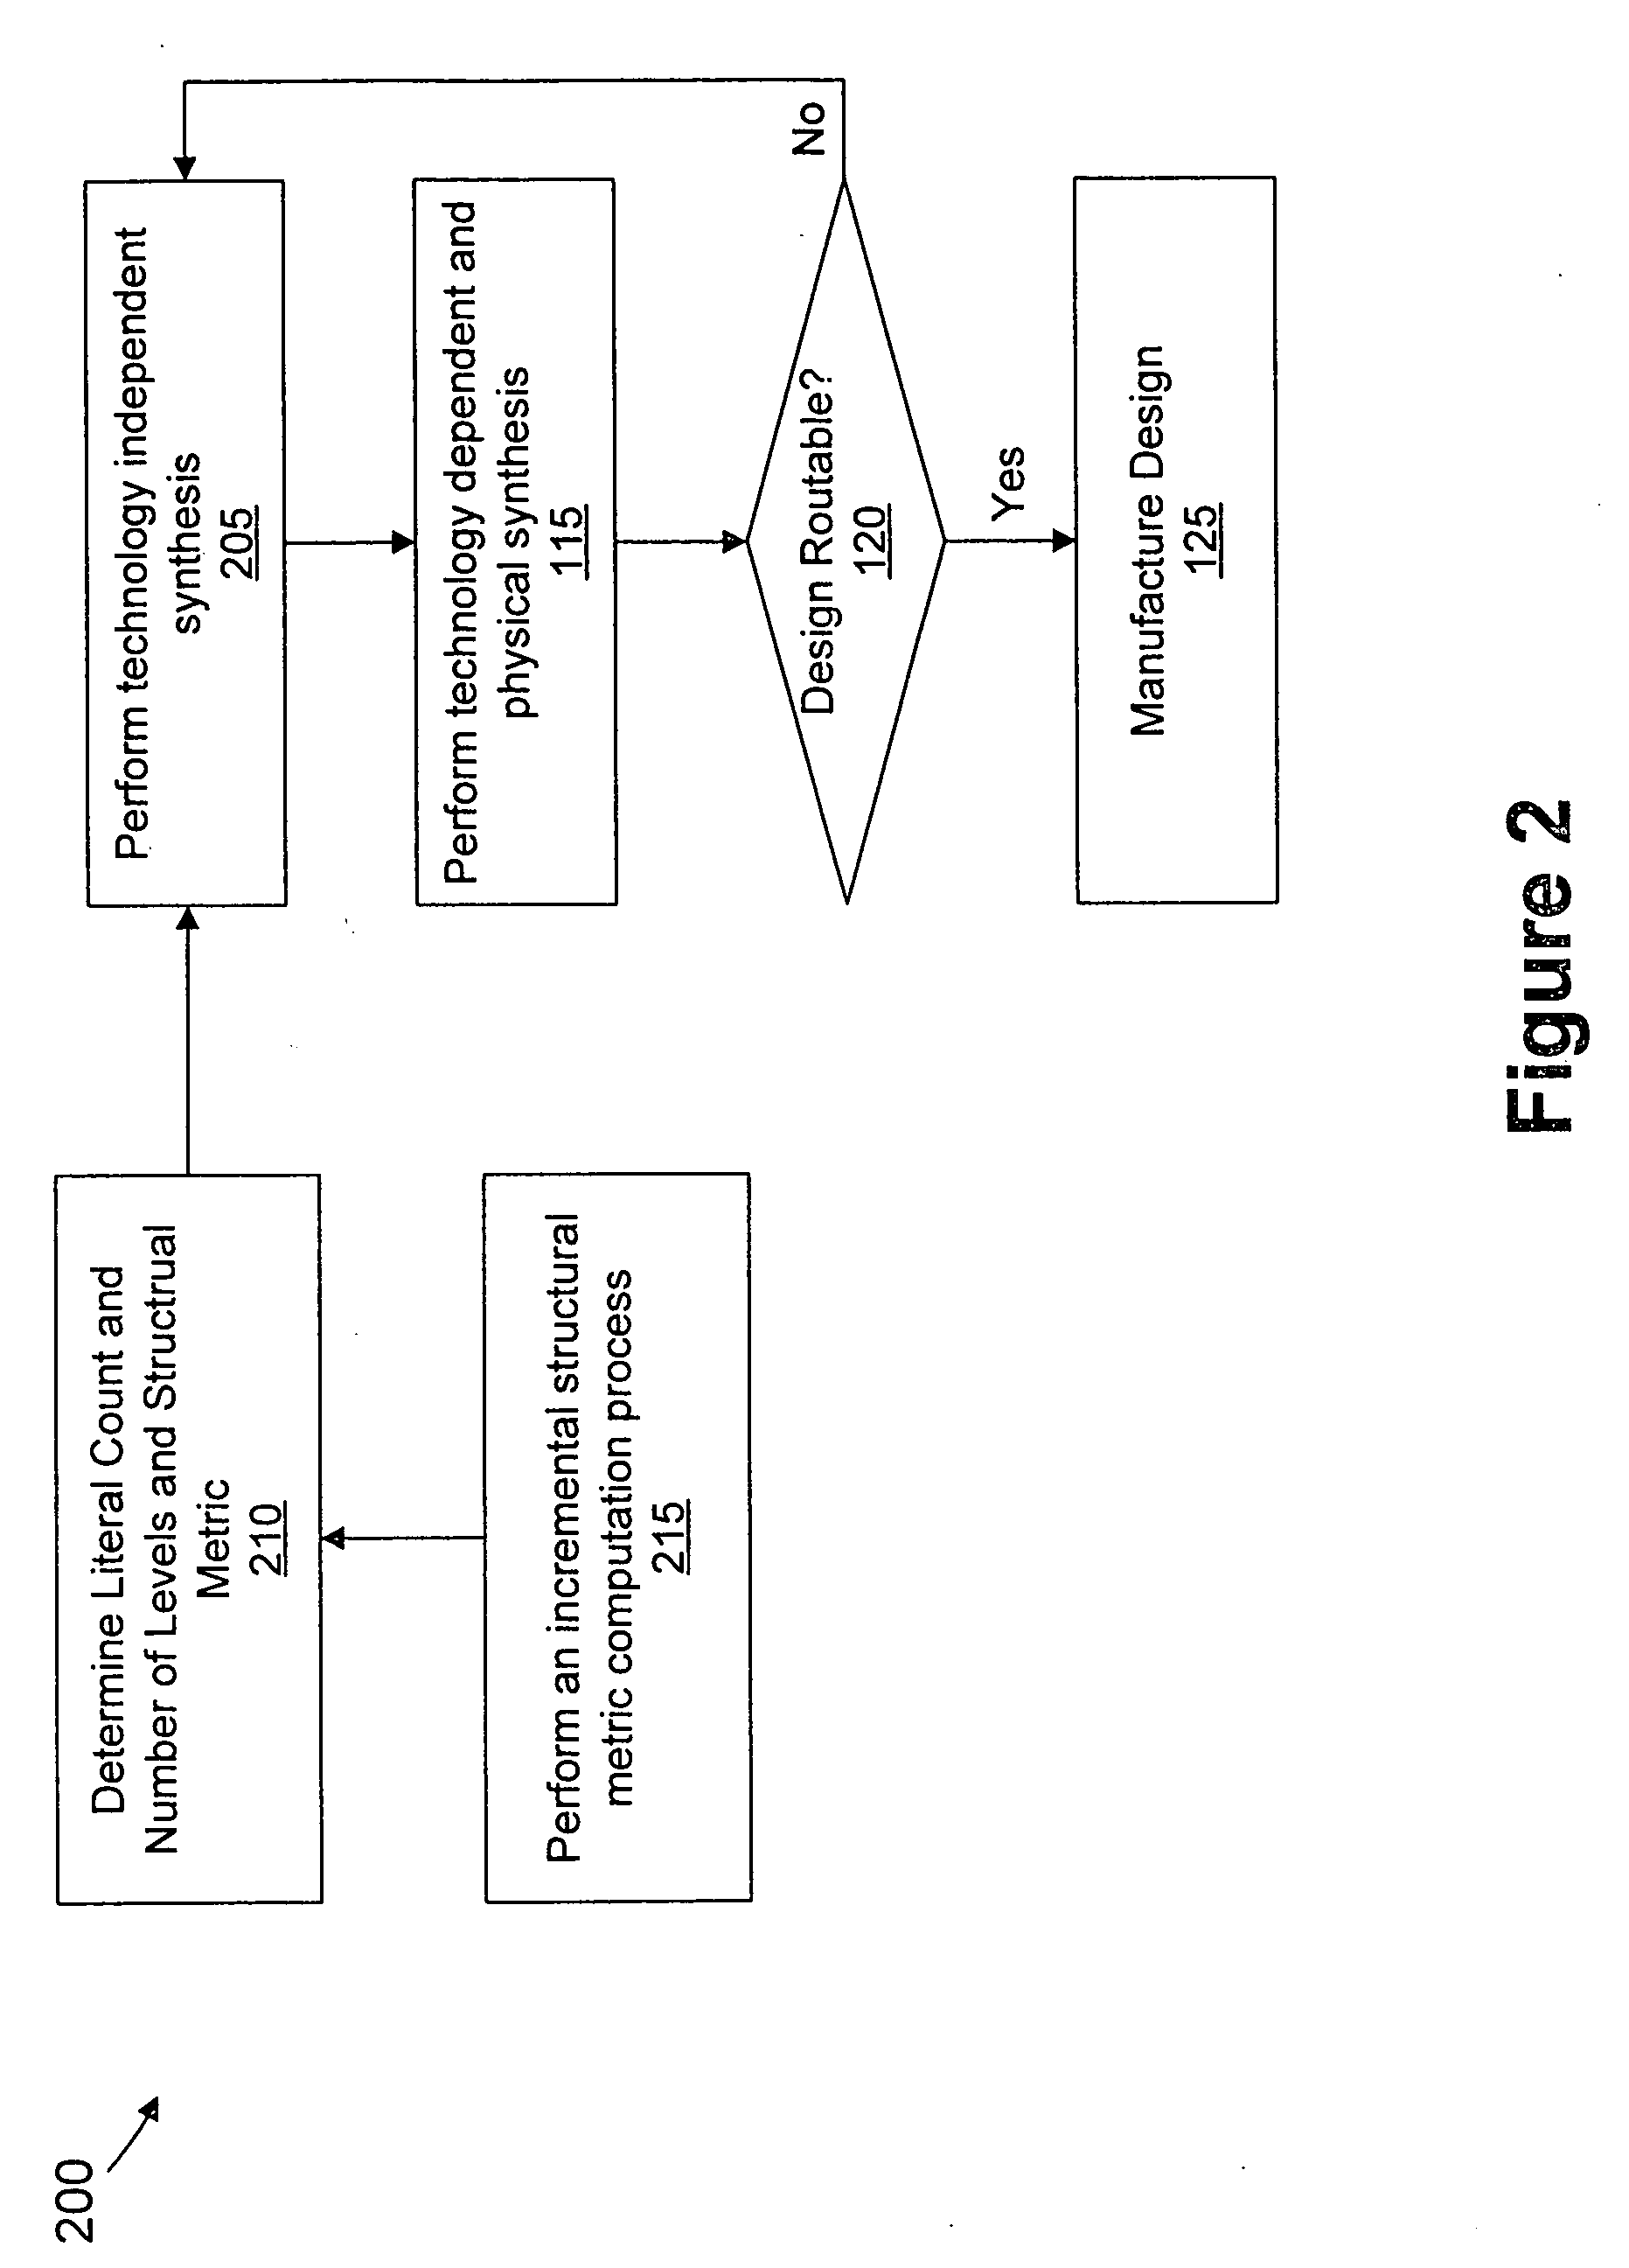 Method for optimization of logic circuits for routability